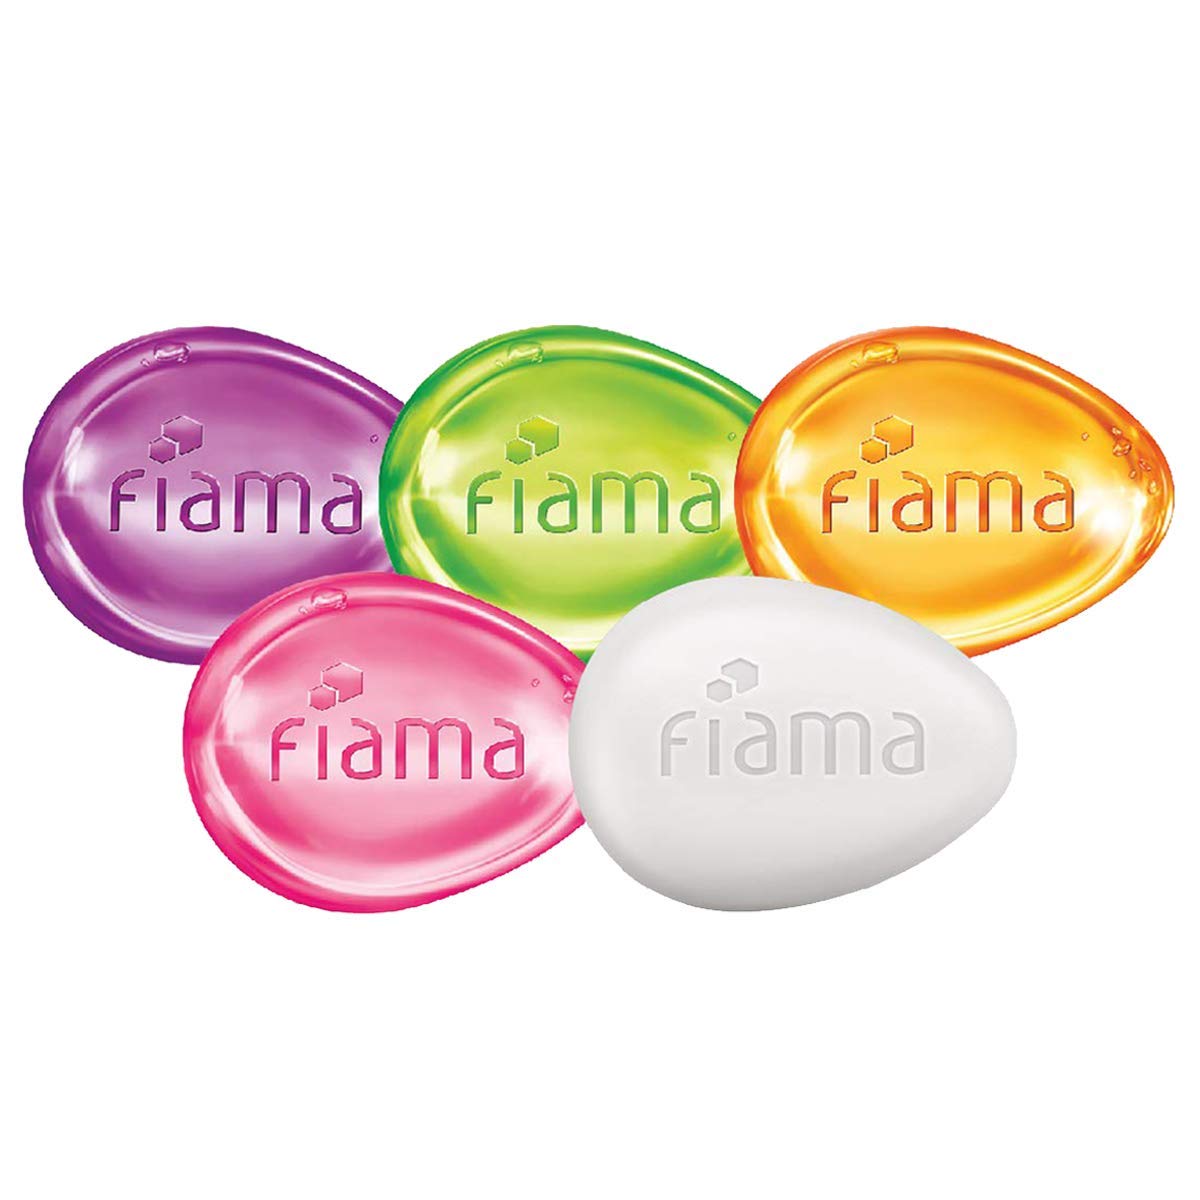 Fiama Gel Bar Celebration Pack : 5 Luxurious Variants with Unique Ingredients Soap - 125gm (Buy 4 Get 1 Free)